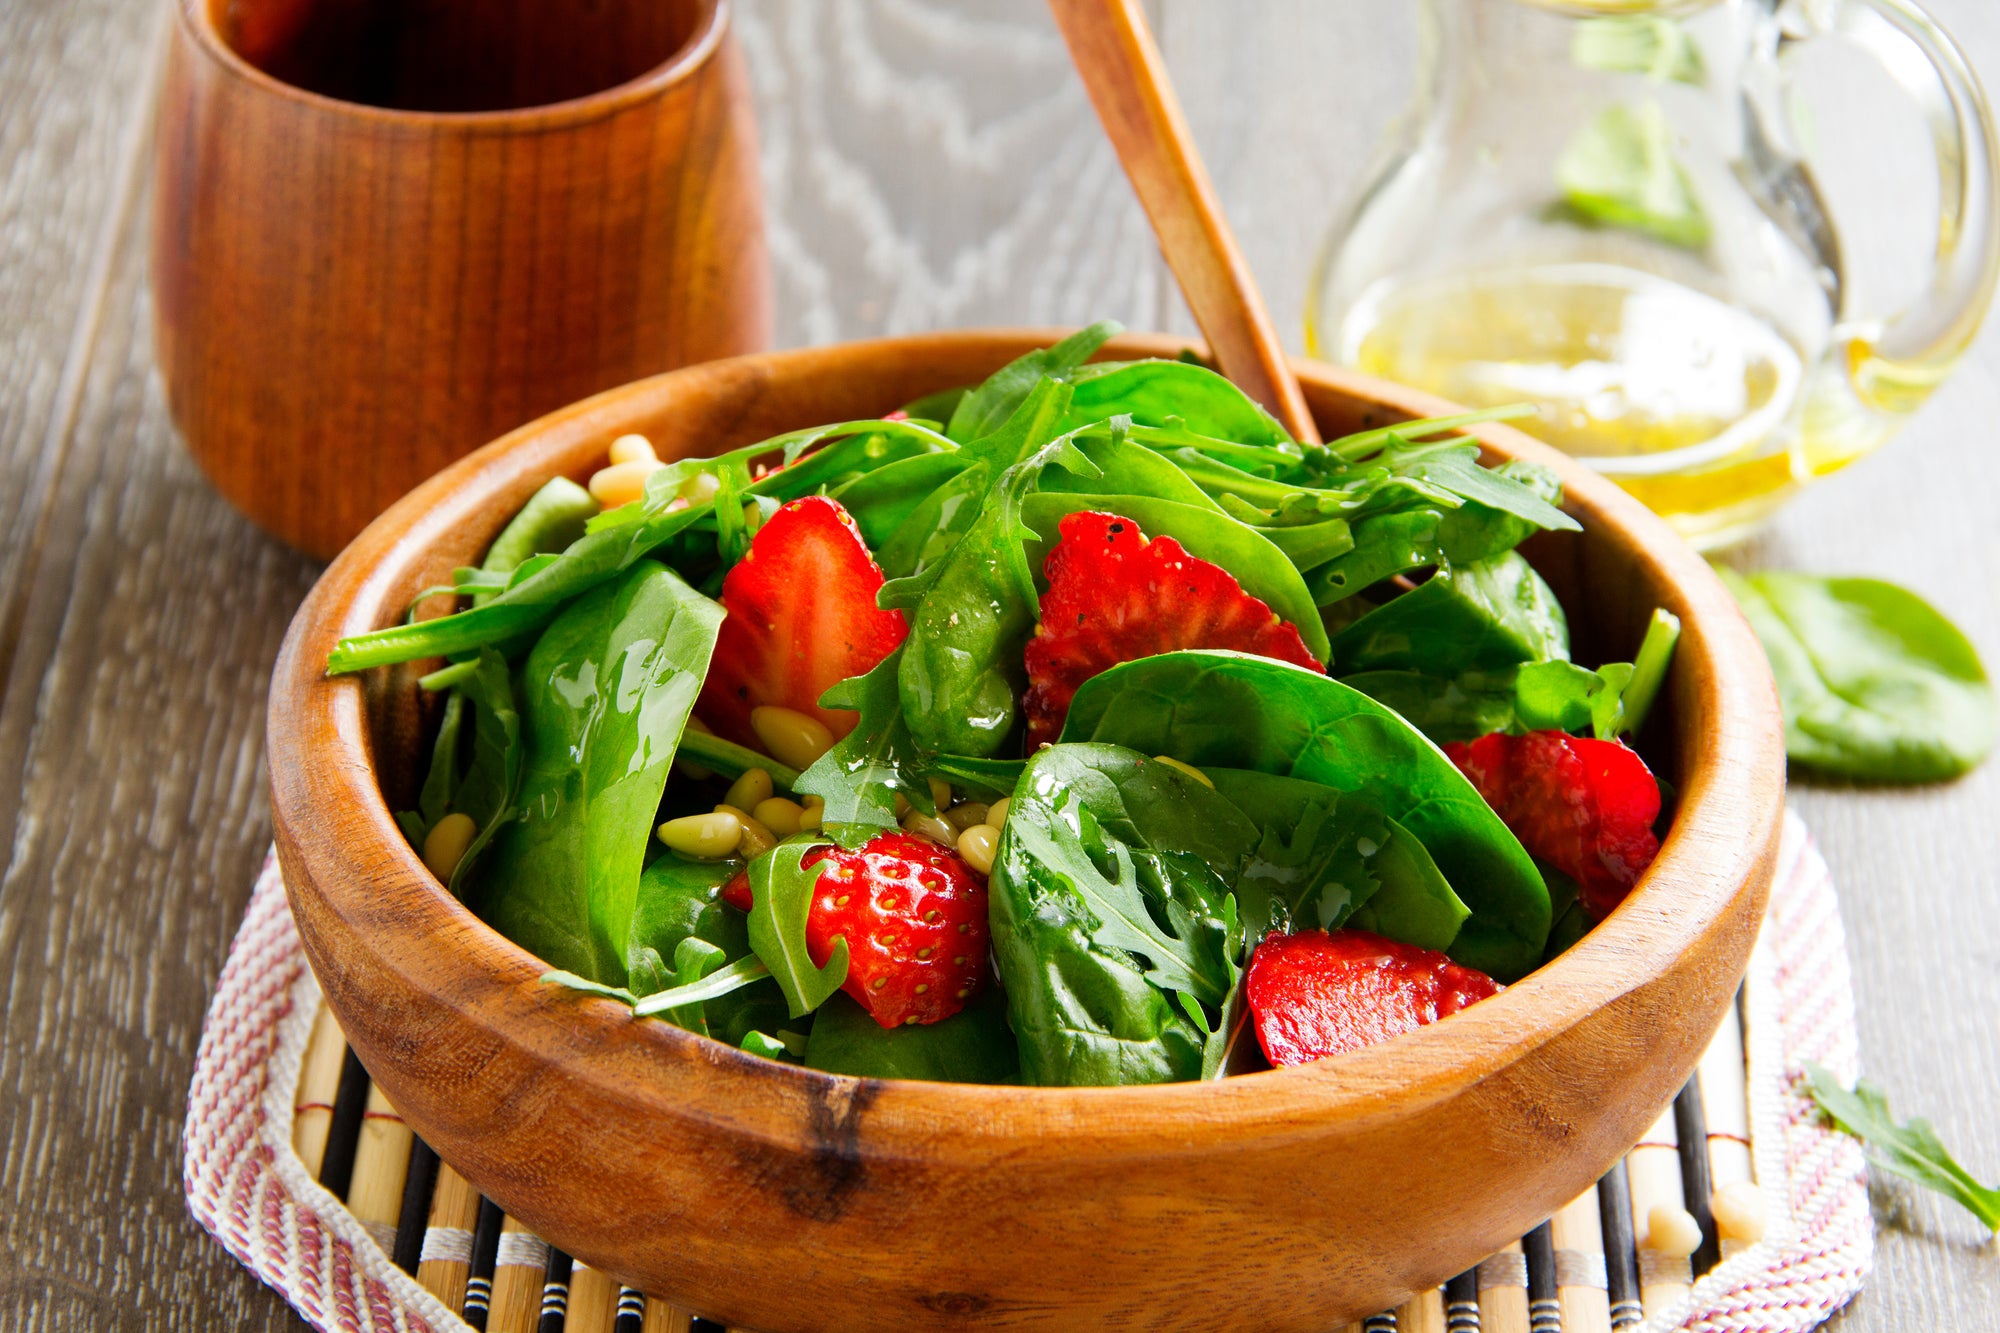 Marilyns Strawberry/Spinach Salad